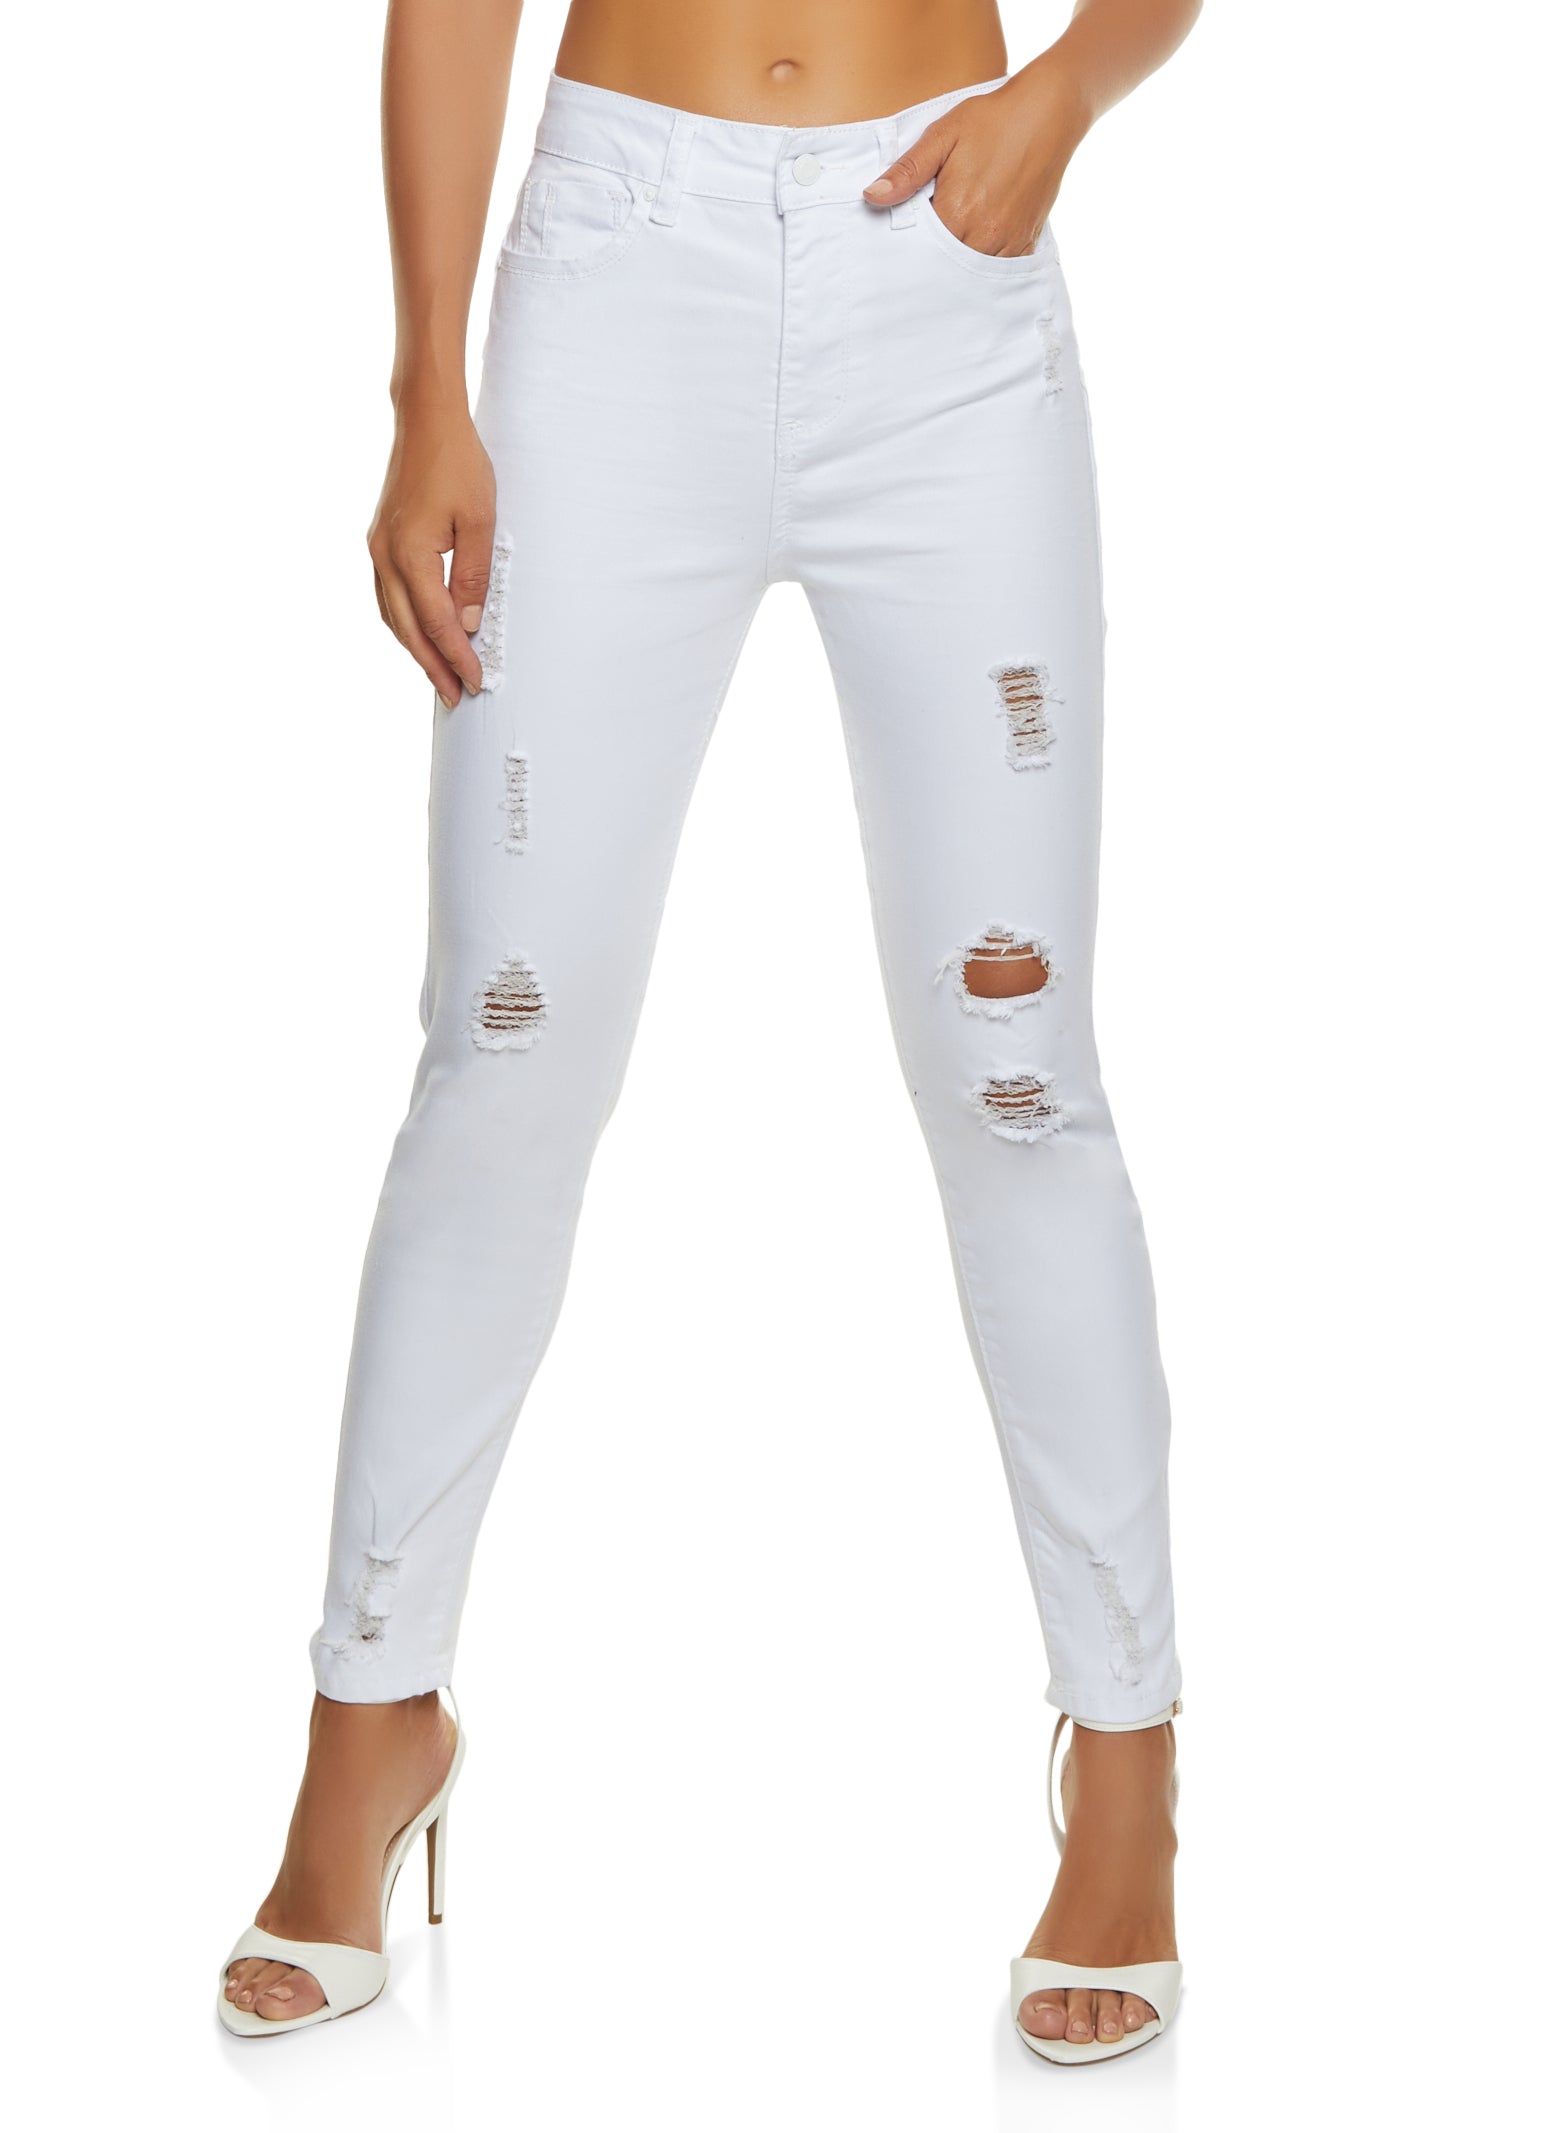 WAX Distressed Frayed Skinny Jeans - White